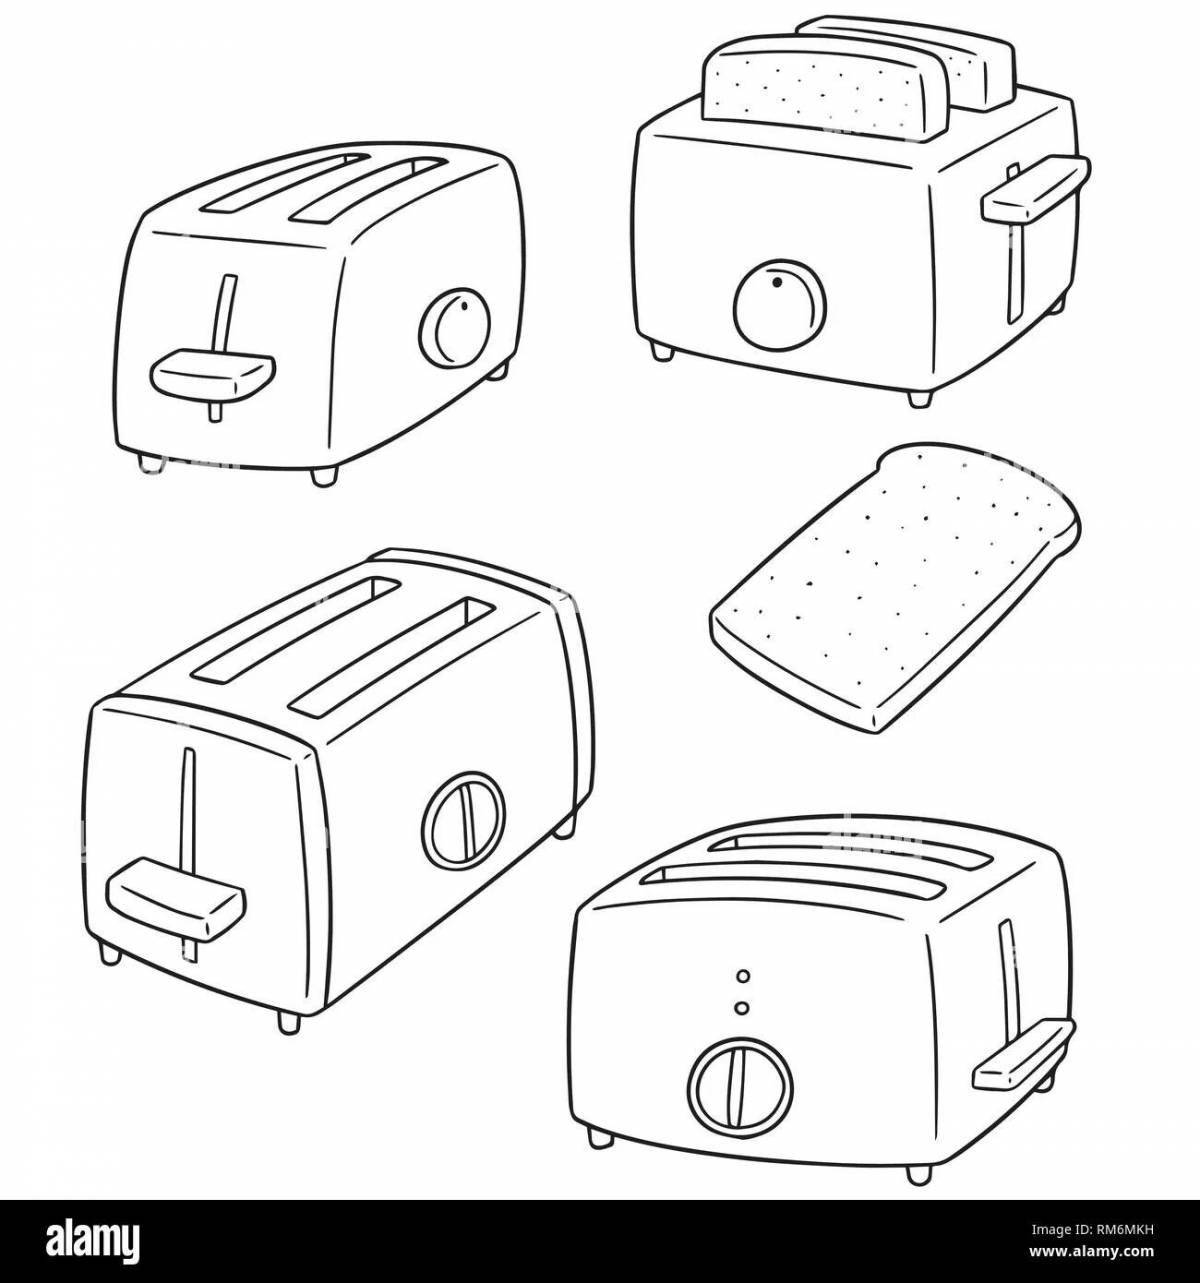 Showy toaster coloring page